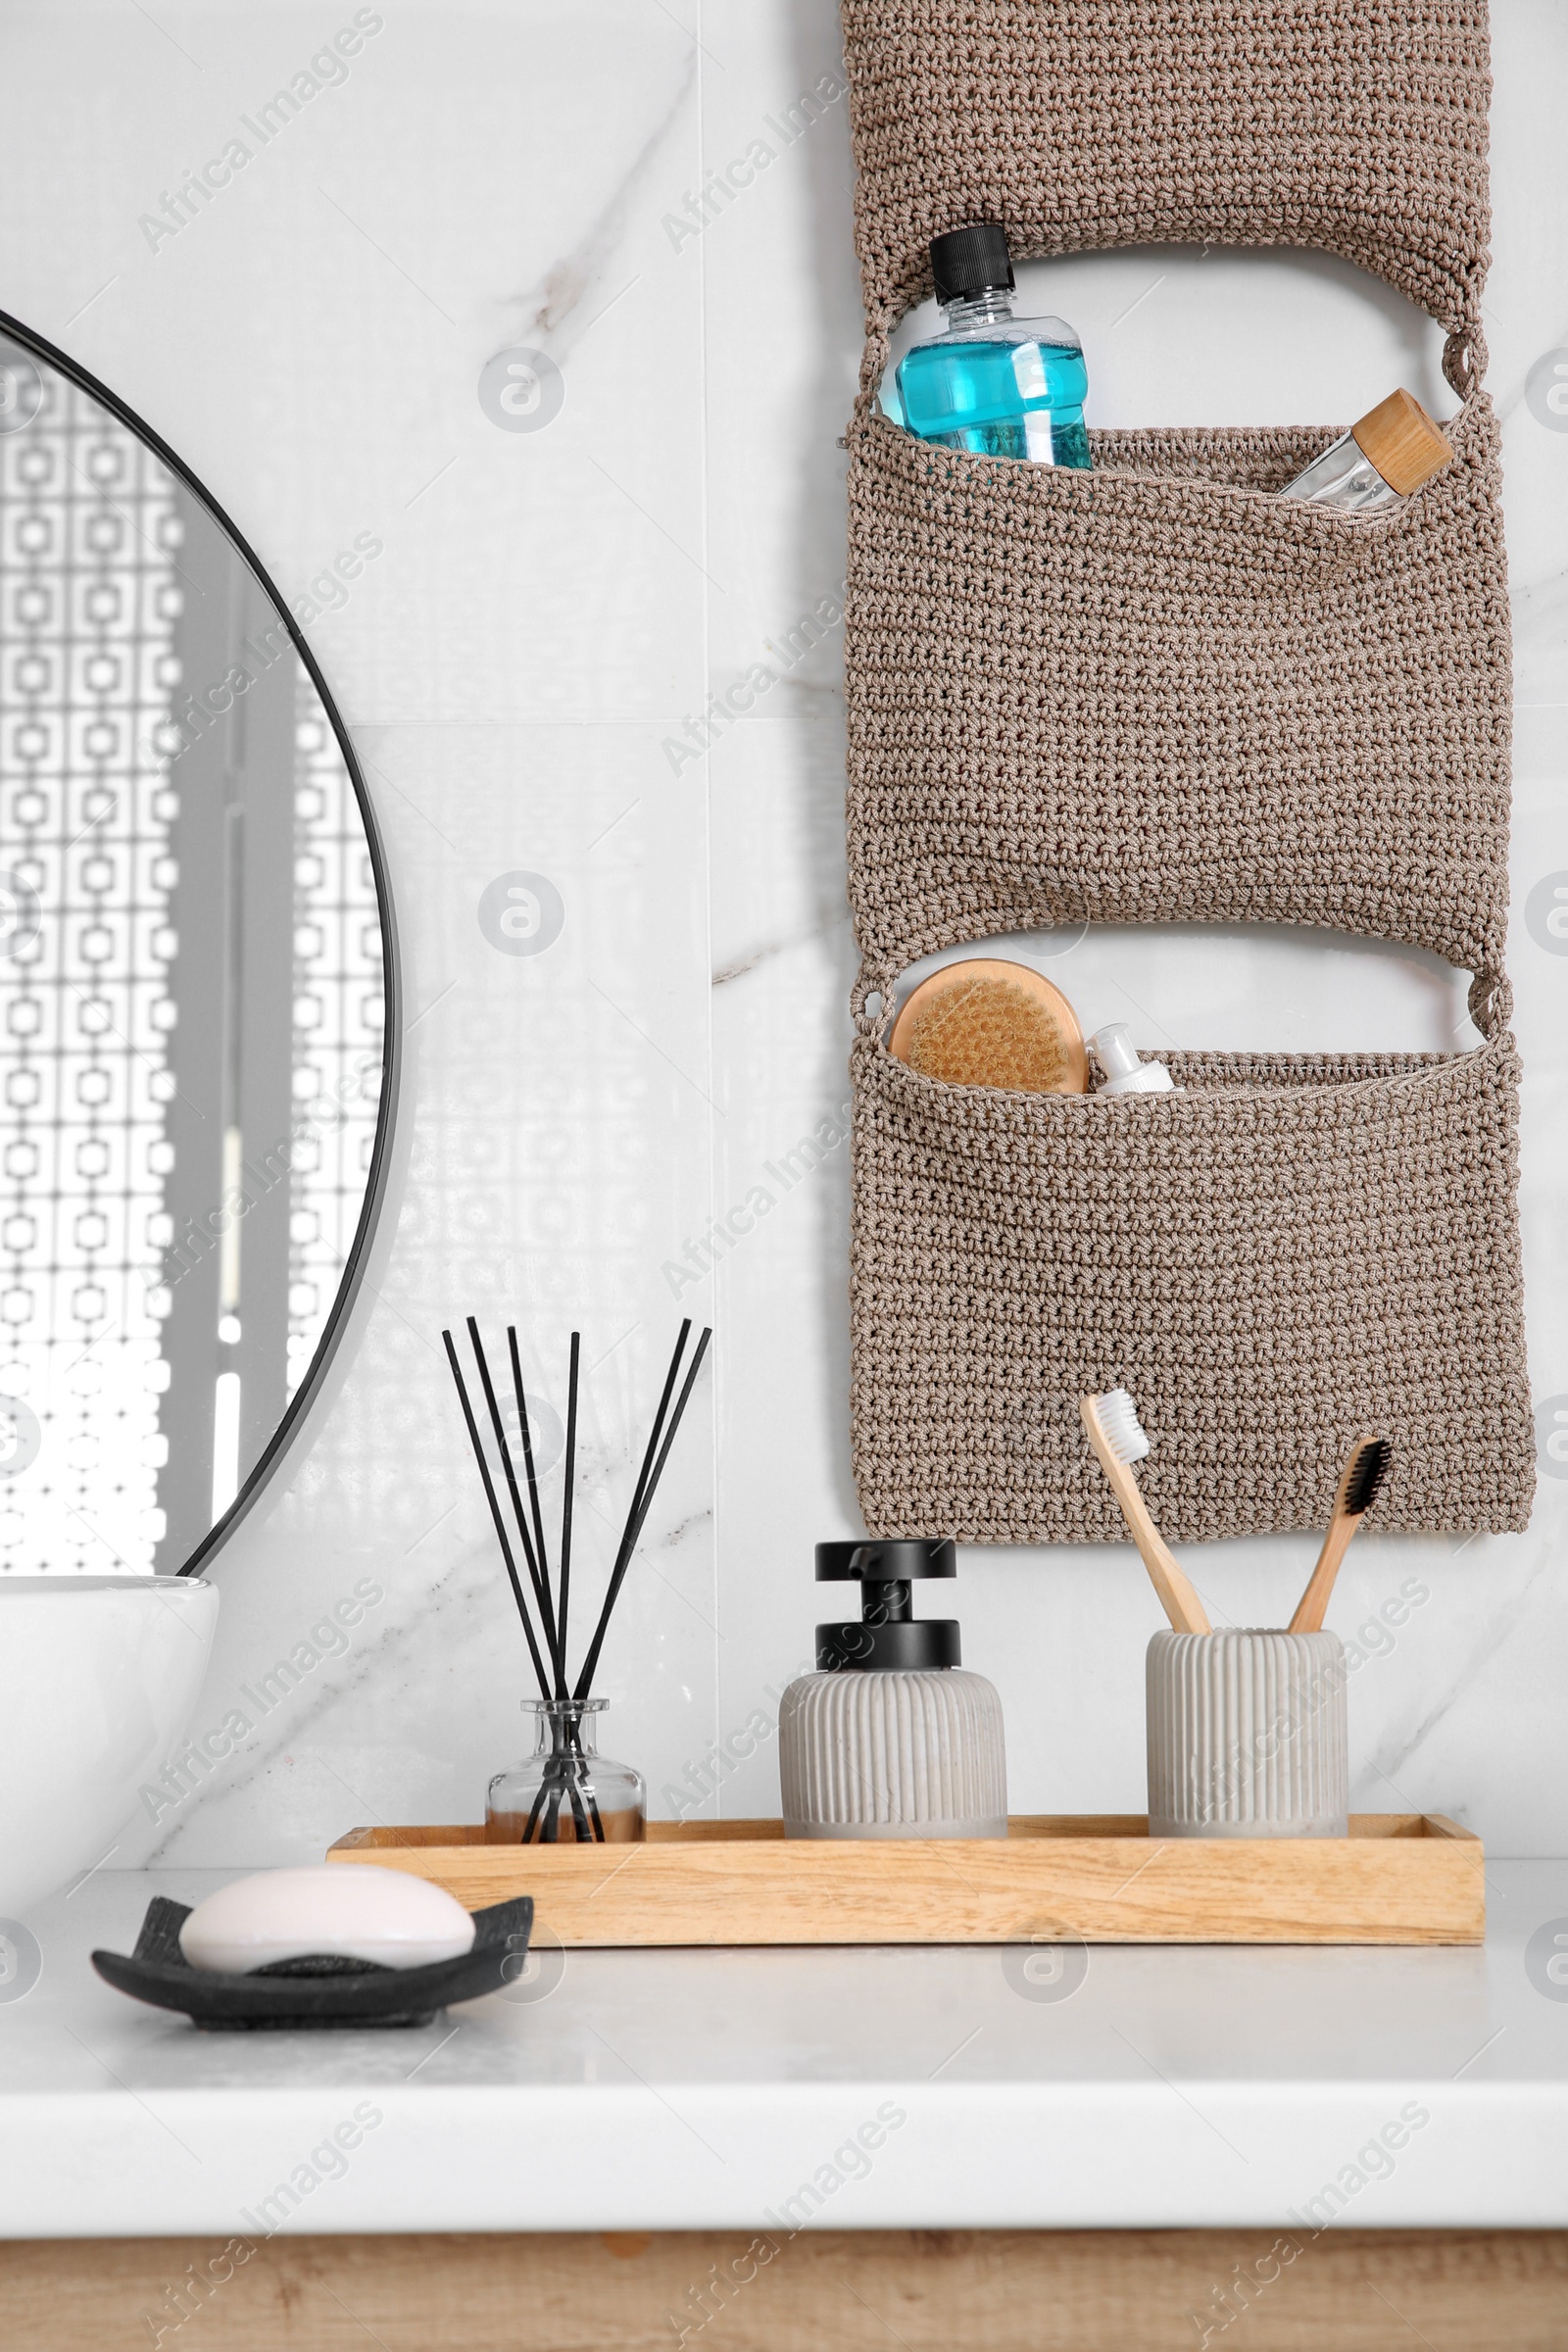 Photo of Knitted organizer hanging on wall in bathroom